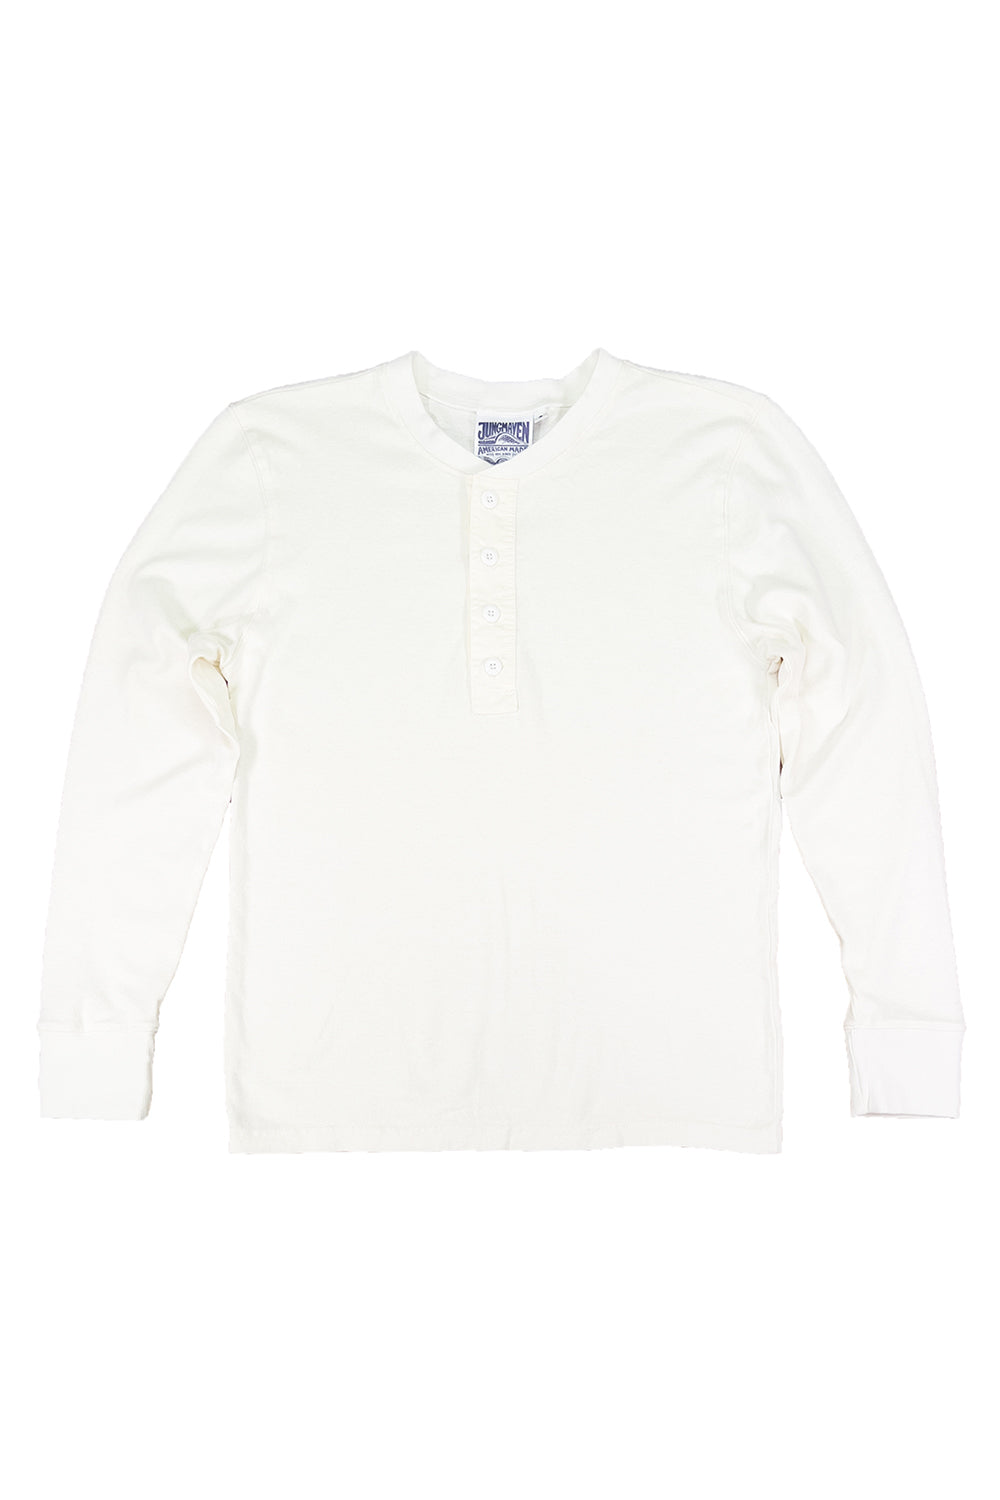 Mountain Henley | Jungmaven Hemp Clothing & Accessories / Color: Washed White